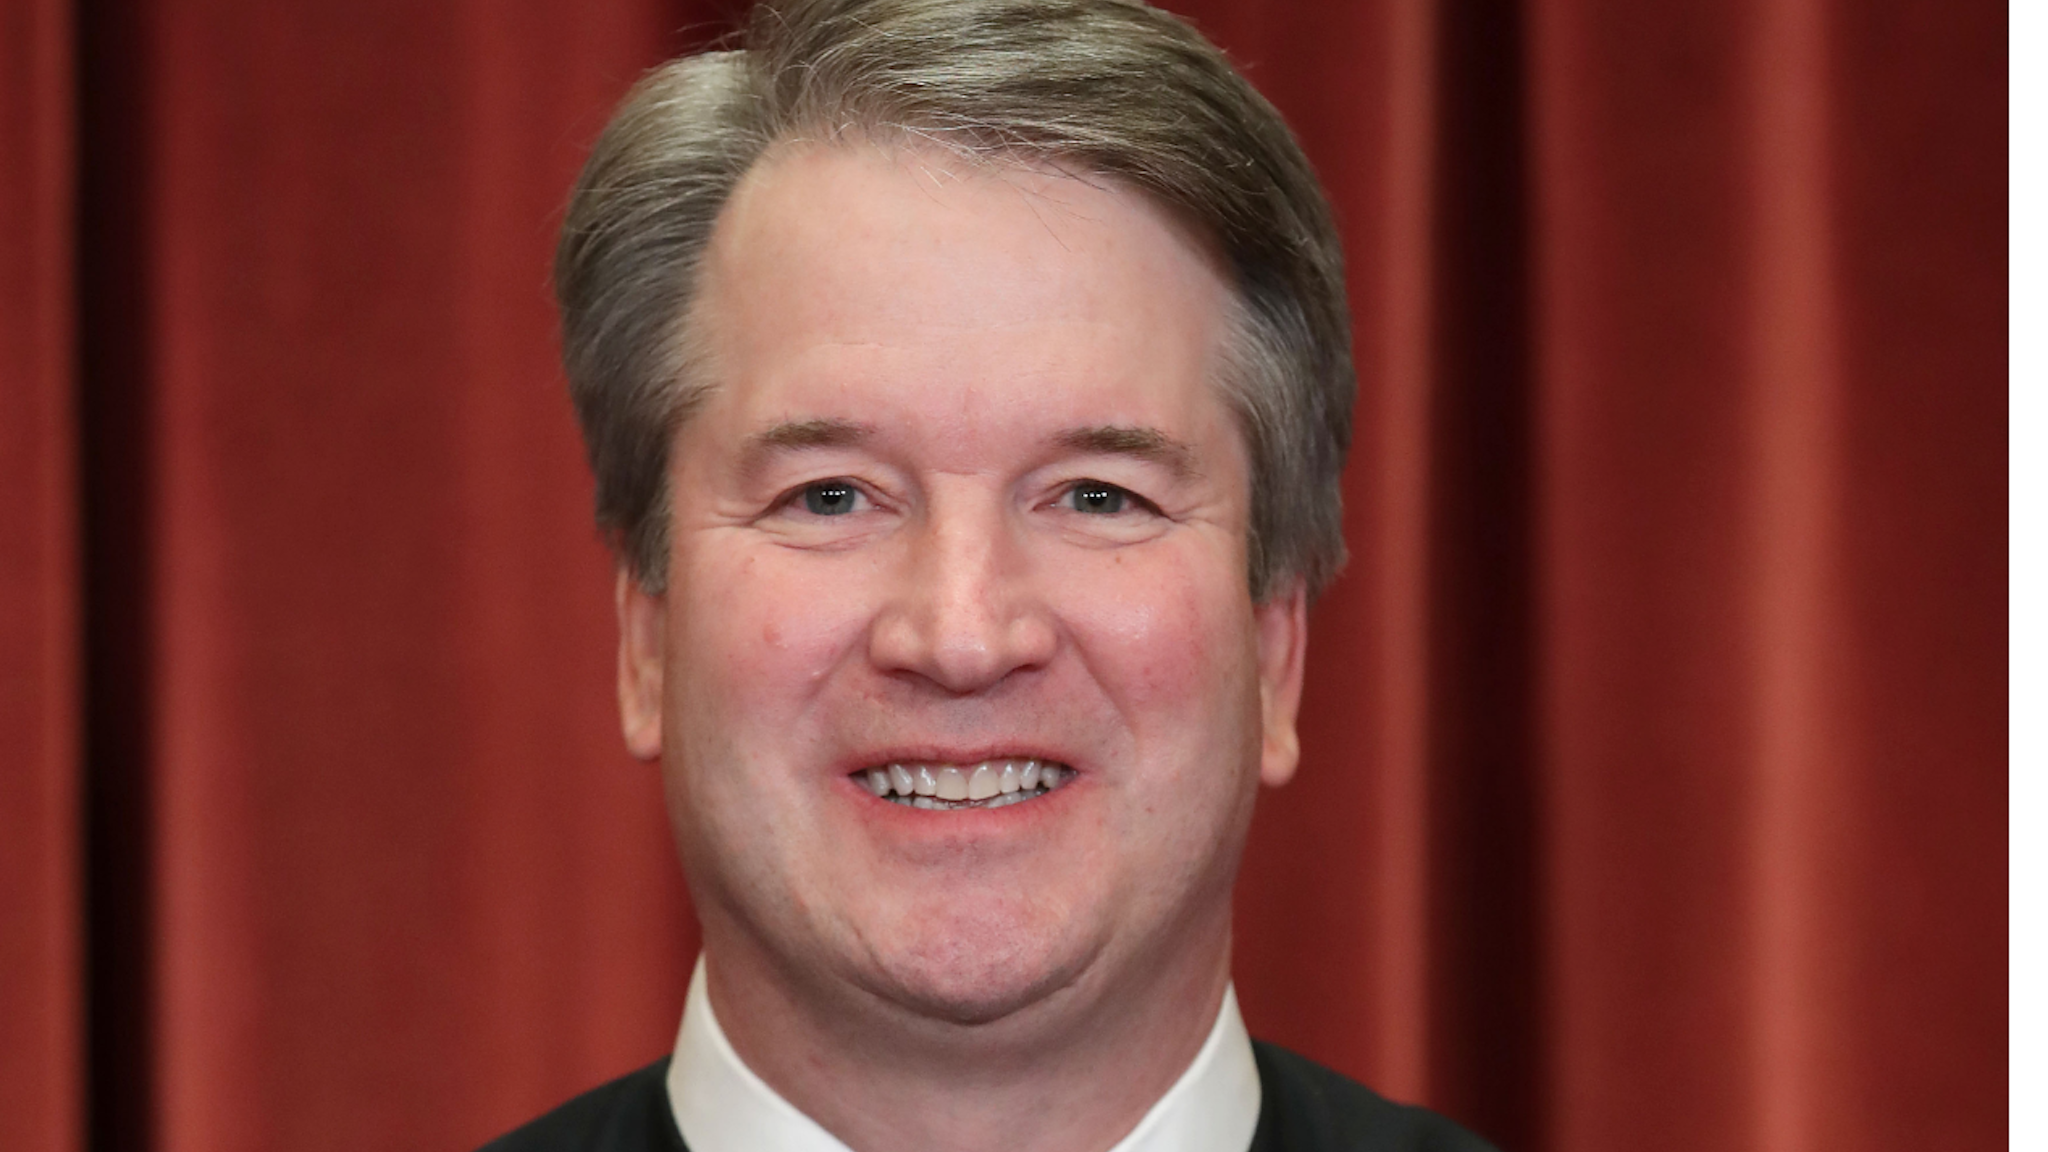 United States Supreme Court Associate Justice Brett Kavanaugh poses for the court's official portrait in the East Conference Room at the Supreme Court building November 30, 2018 in Washington, DC.